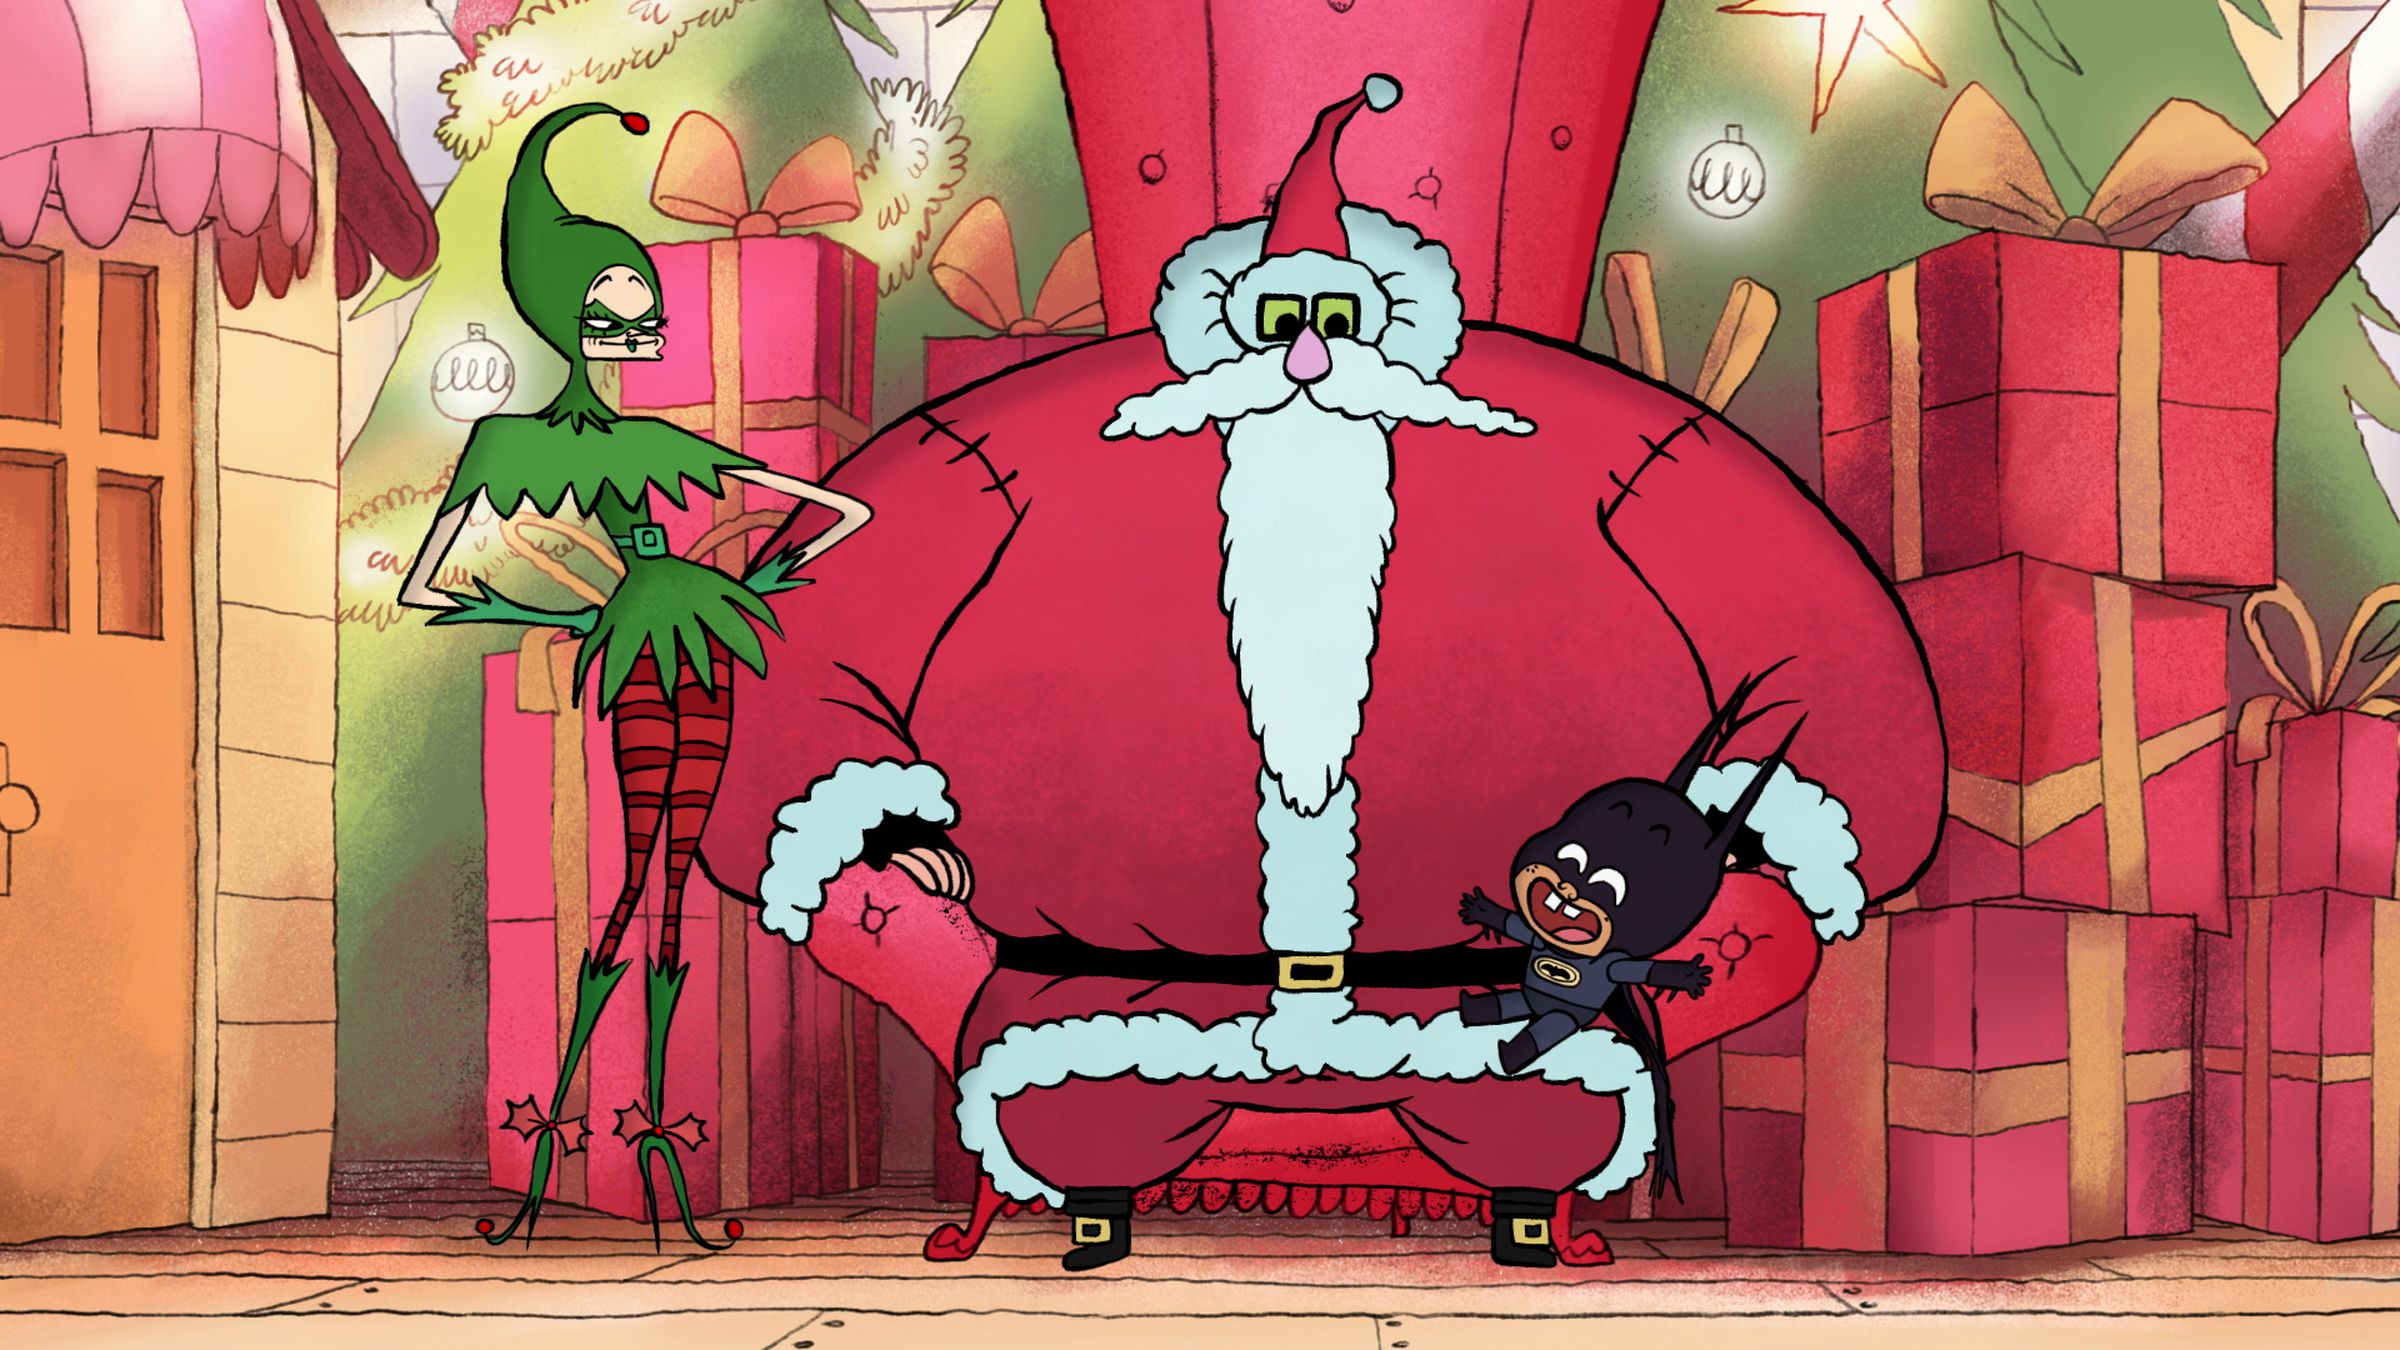 A still image from the animated film Merry Little Batman.